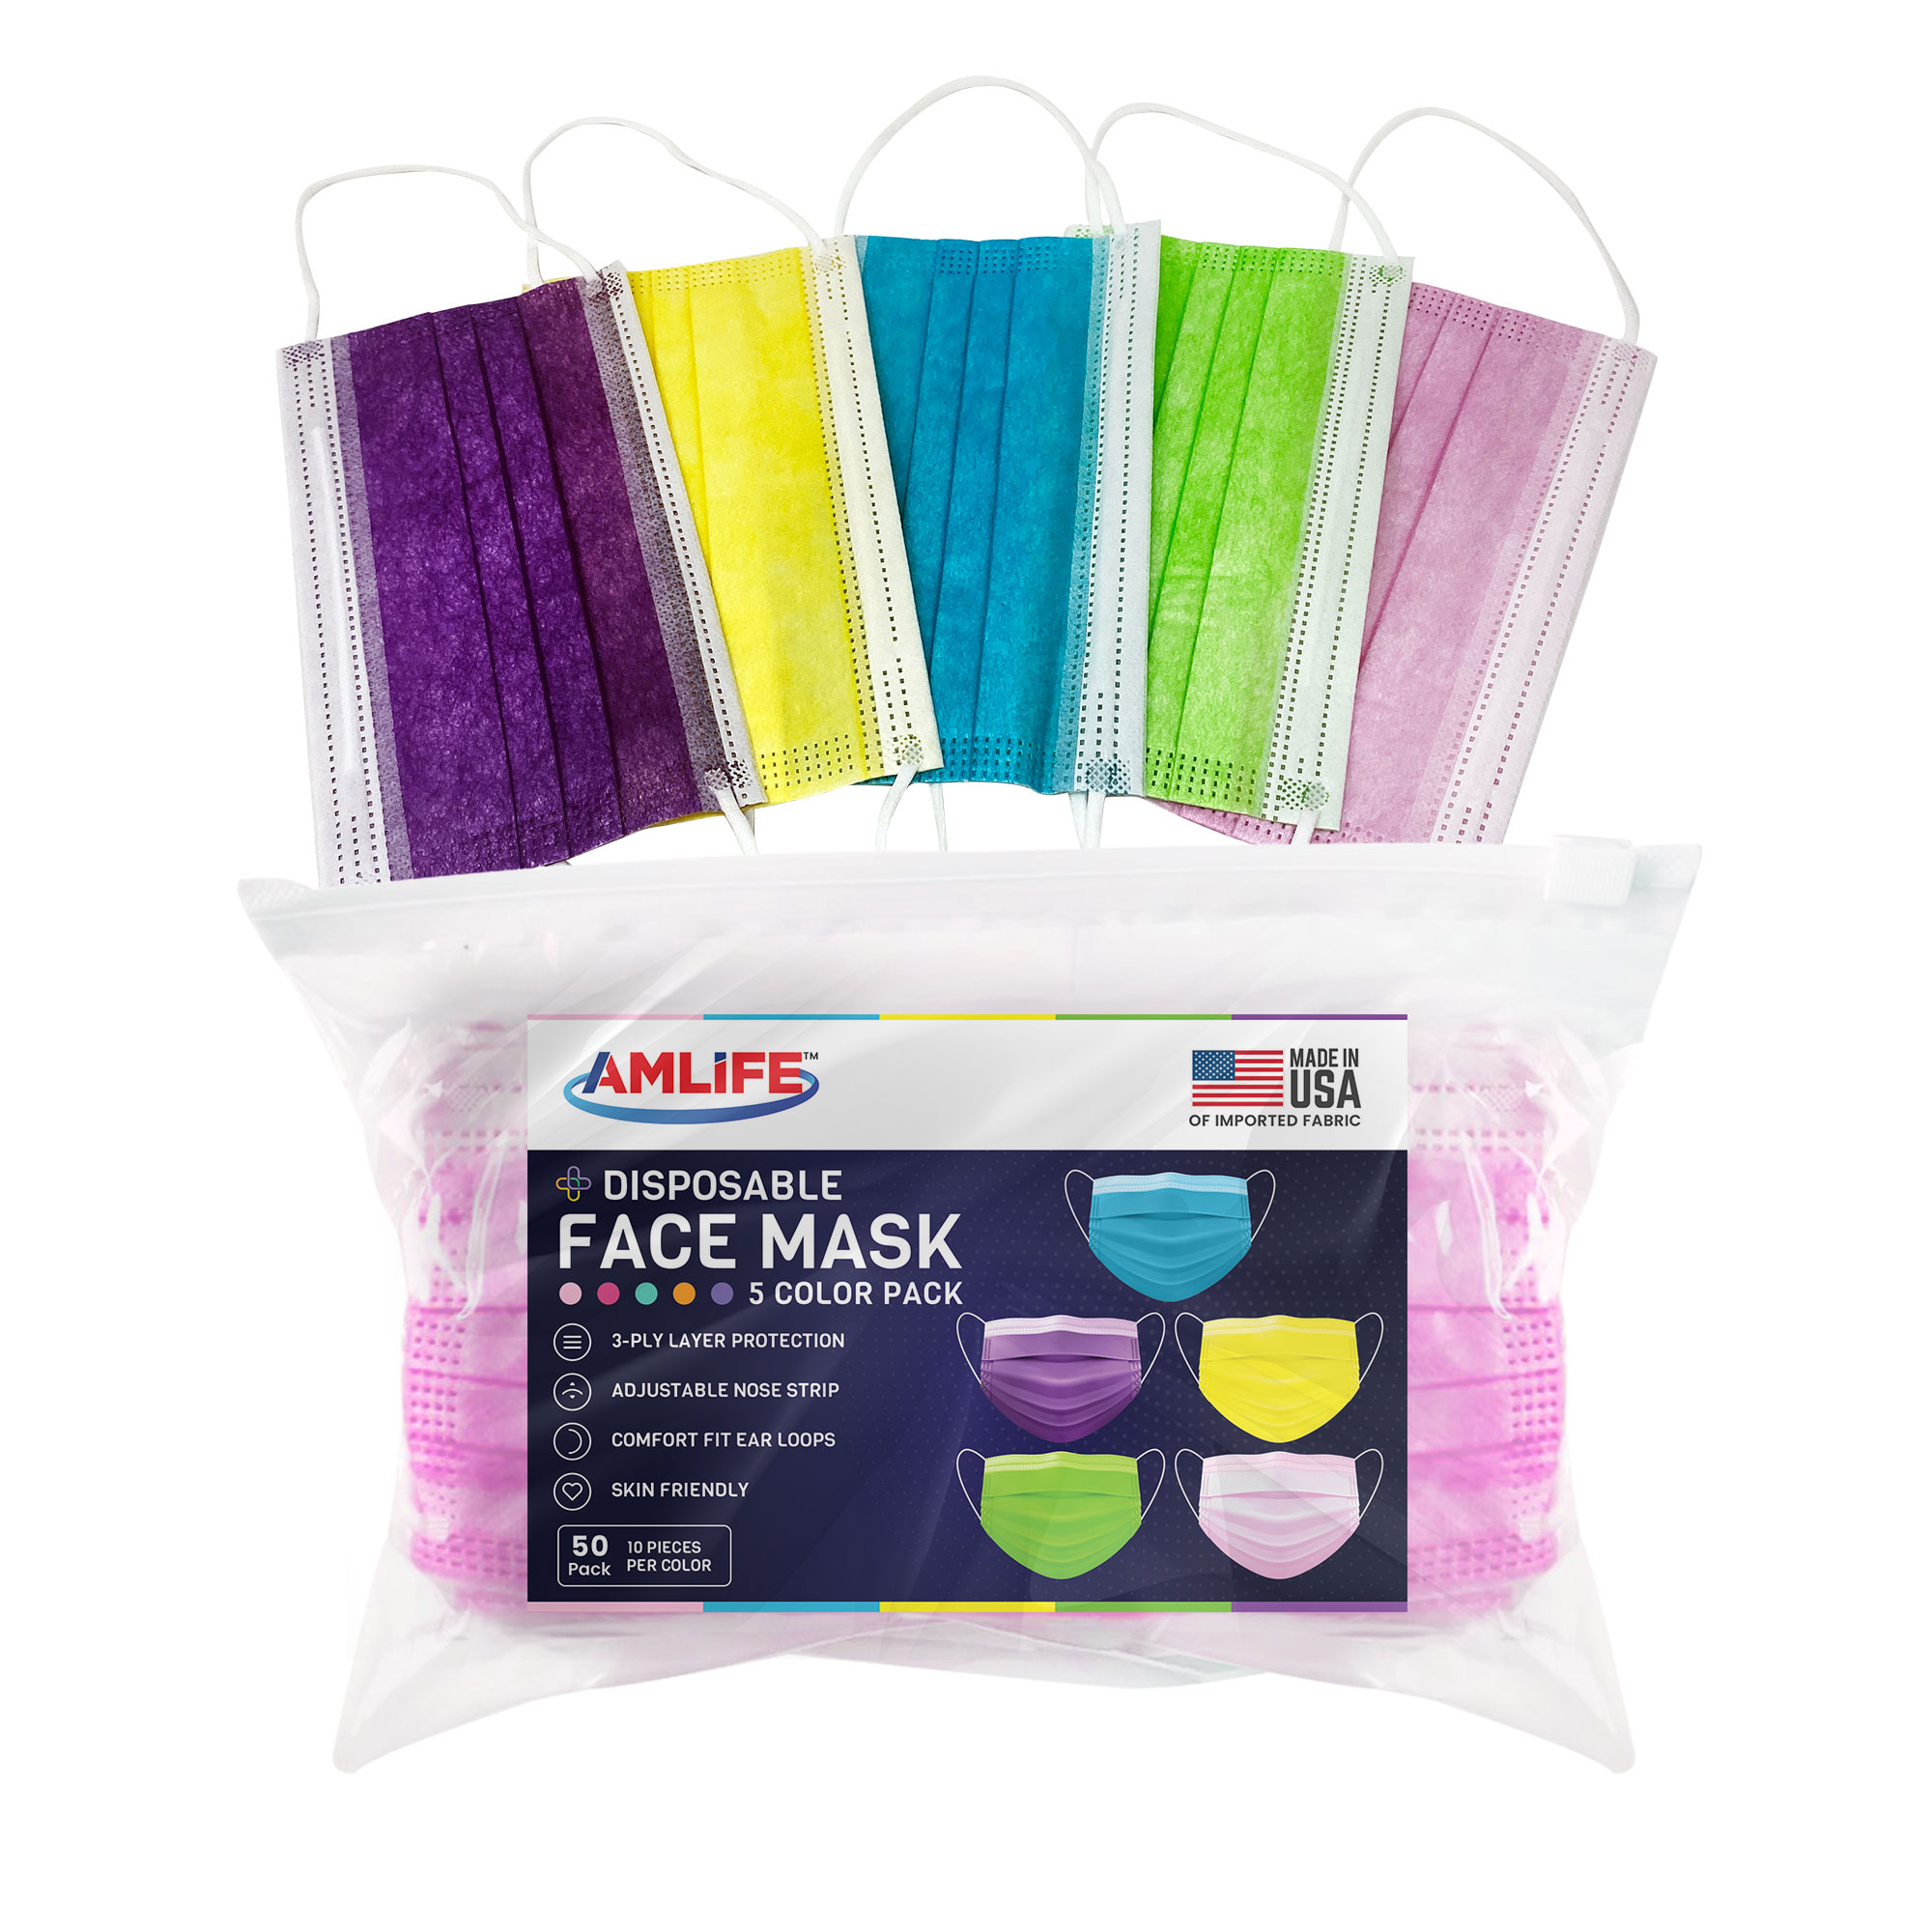 Campus Wardrobe Introduces New Face Masks for Back to School